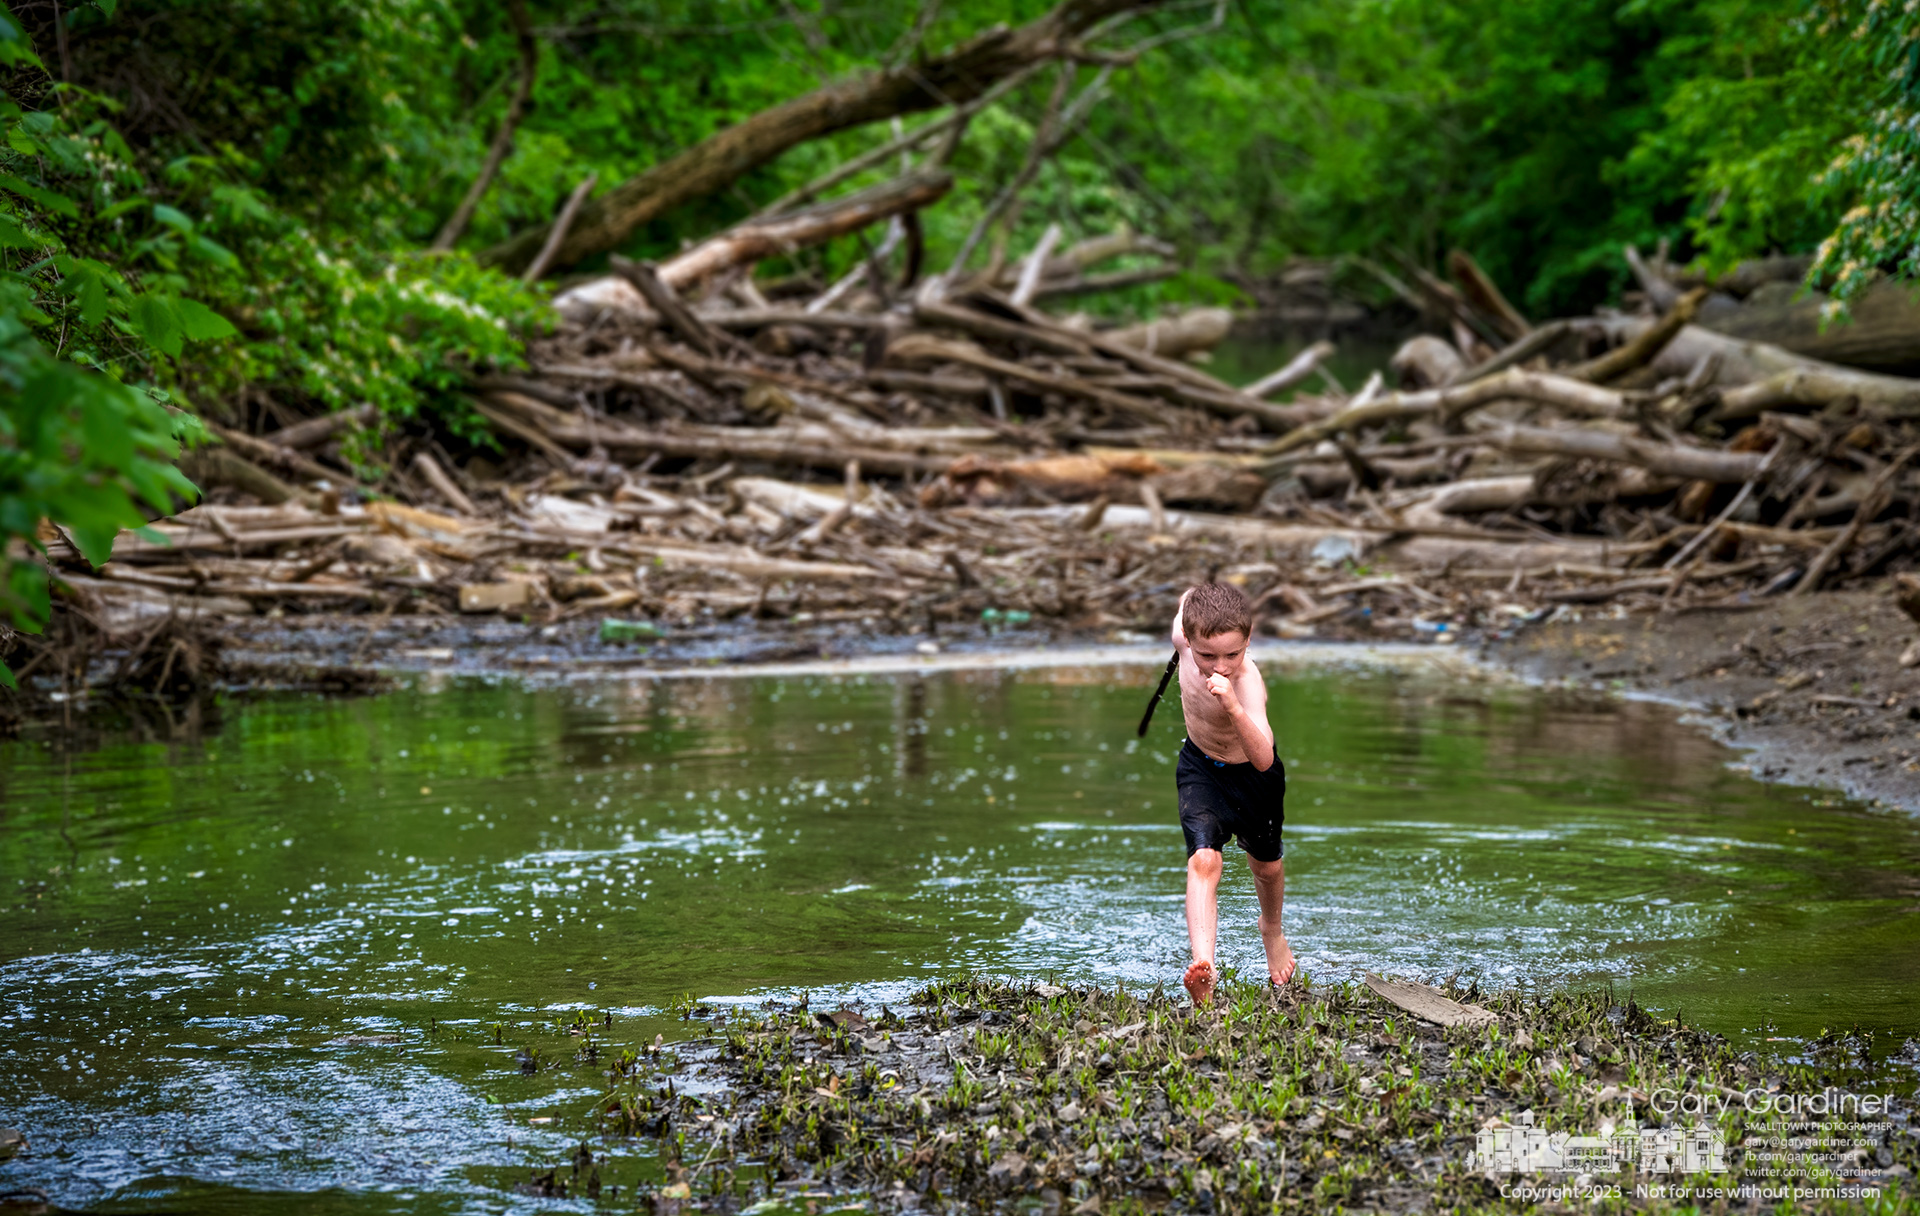 A young boy strides upstream as he battles imaginary enemies in the shallow waters of Alum Creek just below the low-head dam in Westerville. My Final Photo for May 14, 2023.